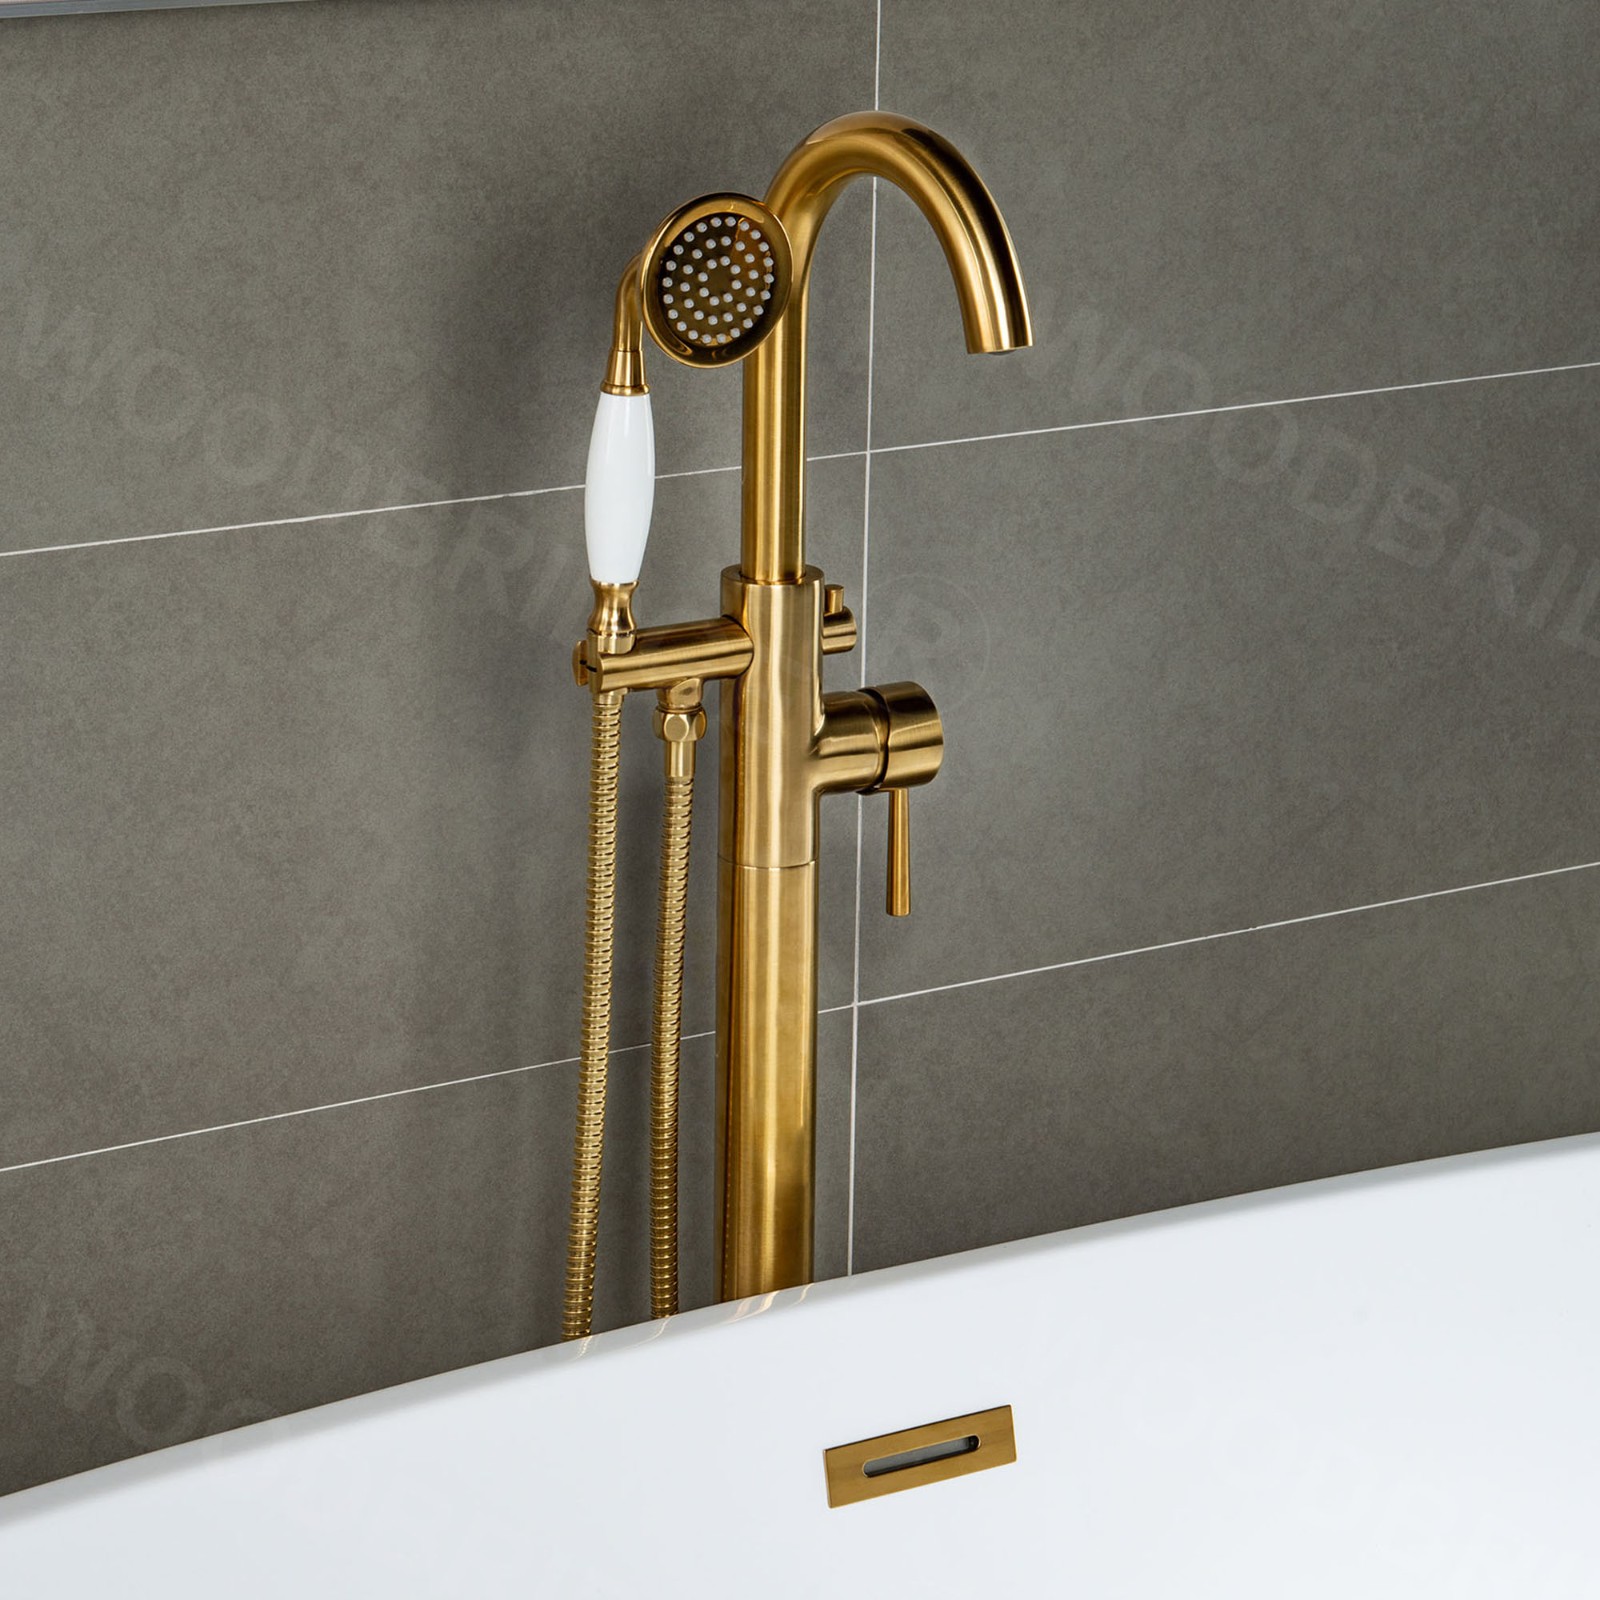  WOODBRIDGE F0026BGVT Fusion Single Handle Floor Mount Freestanding Tub Filler Faucet with Telephone Hand shower in Brushed Gold Finish._4189